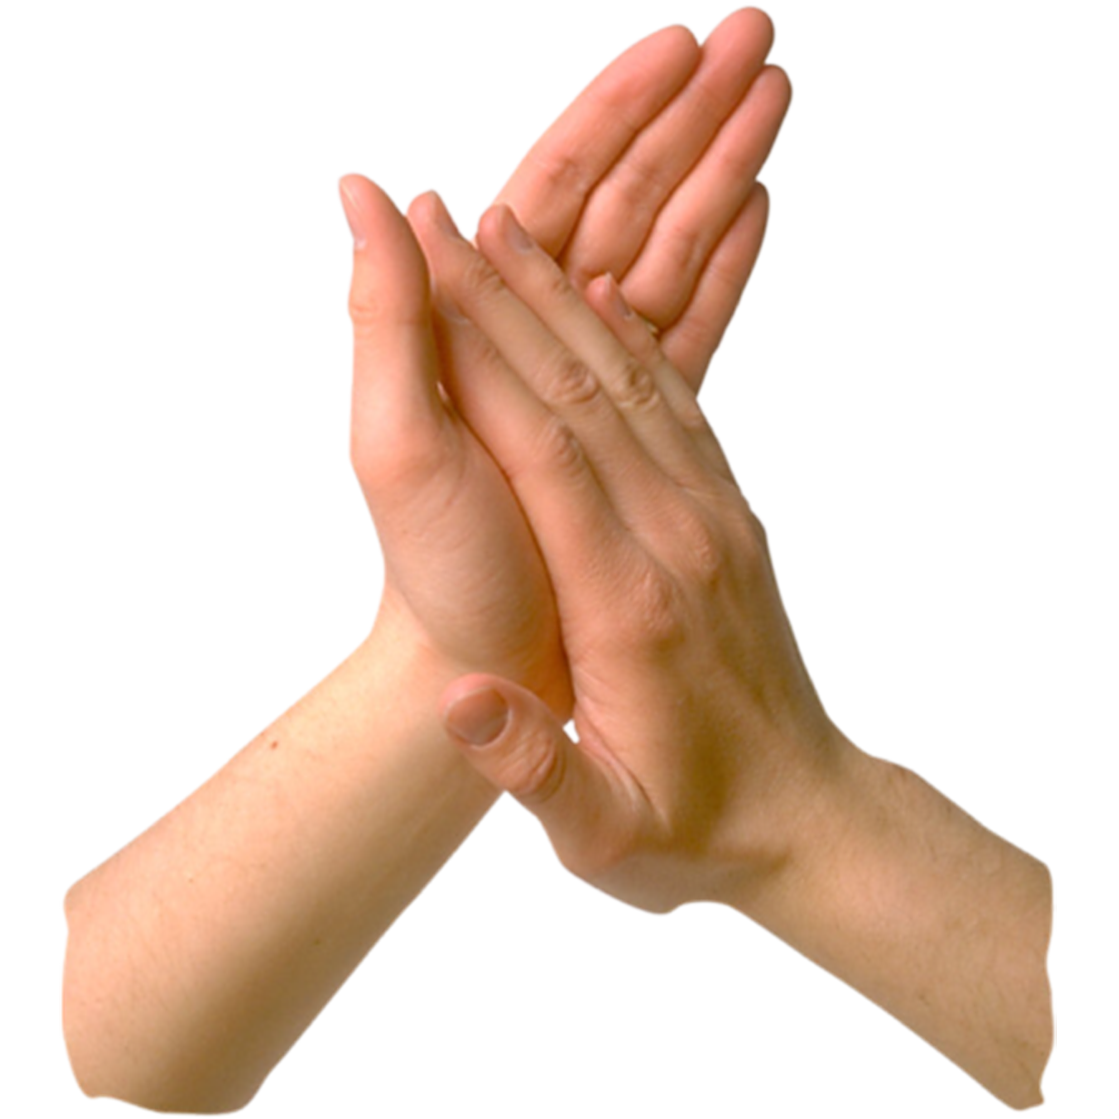 Clapping Hands PNG High Quality Image